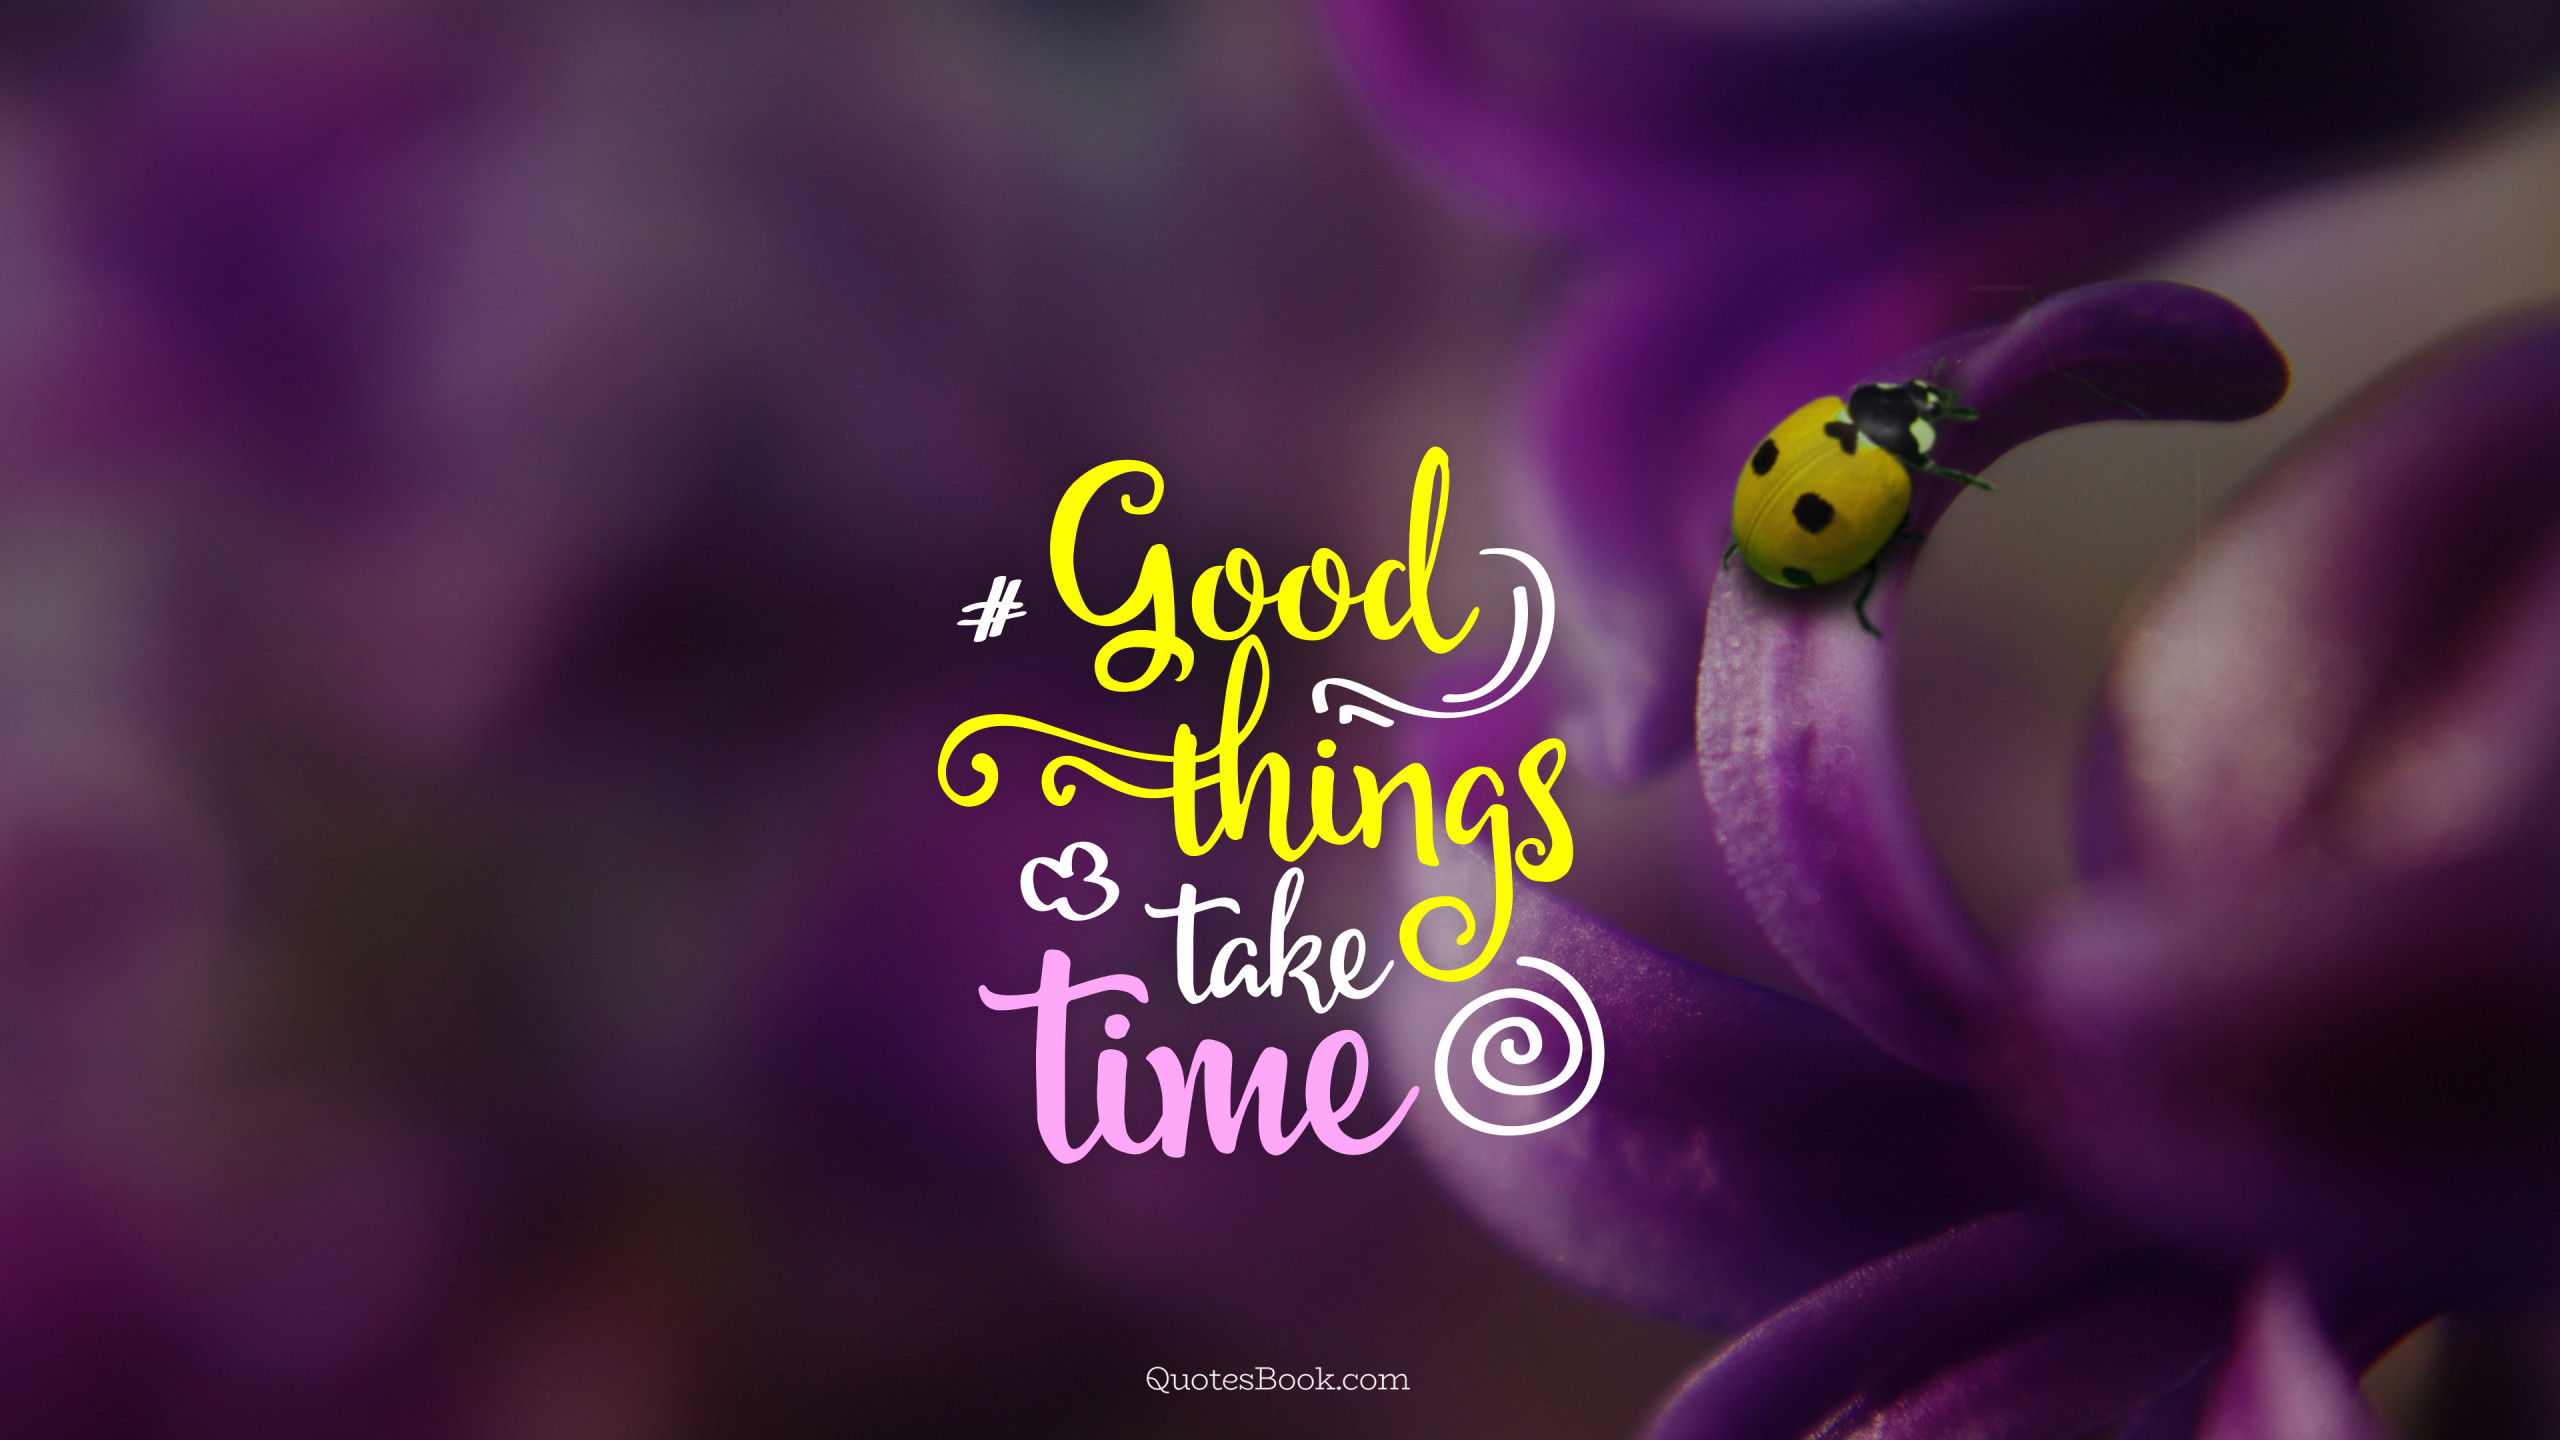 Good things take time - Page 3 - QuotesBook